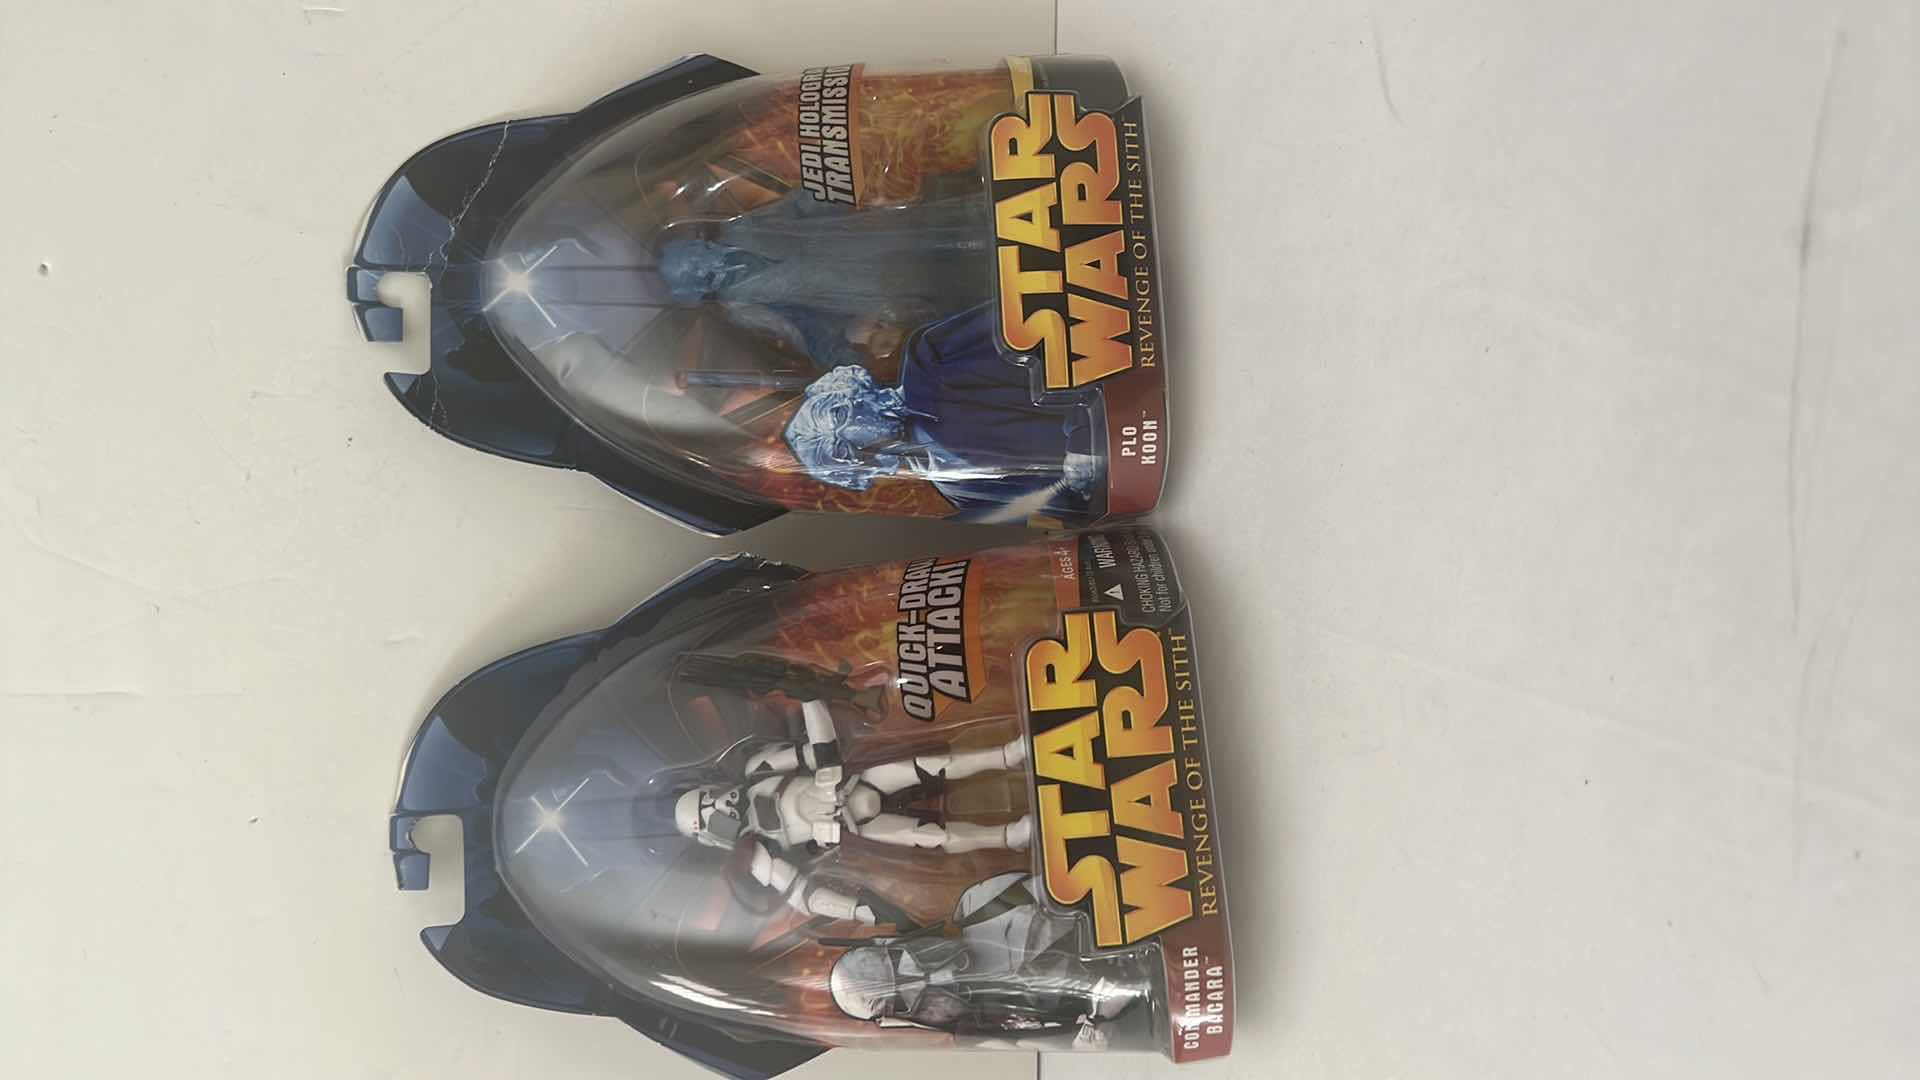 Photo 1 of 2-BRAND NEW STAR WARS REVENGE OF THE SITH ACTION FIGURES $25